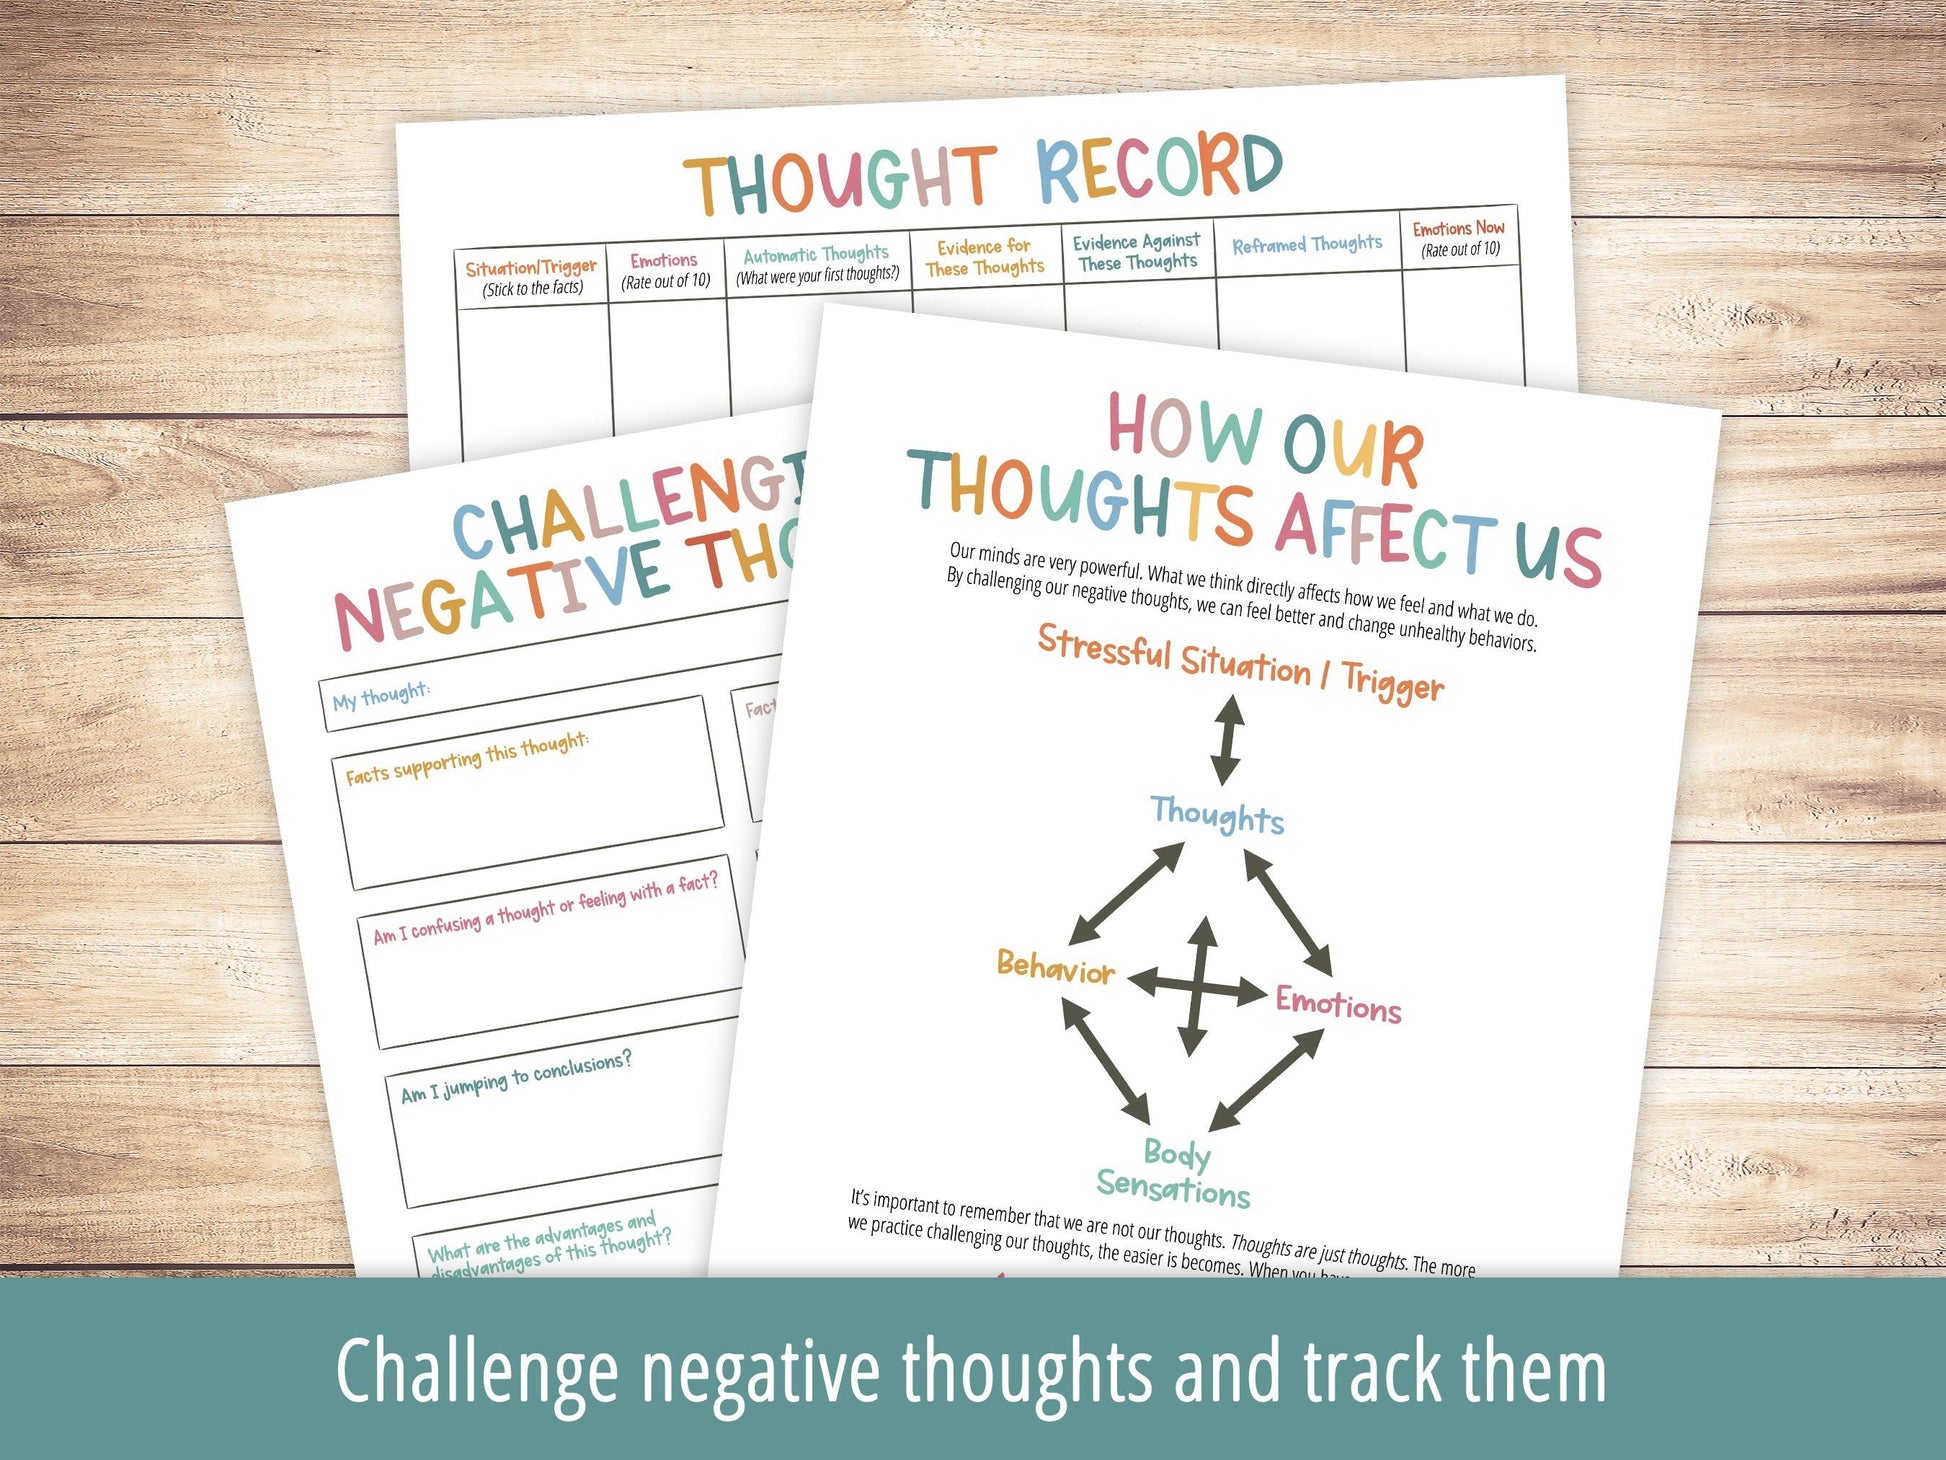 Thought Challenging Worksheets - Shine and Thrive Therapy